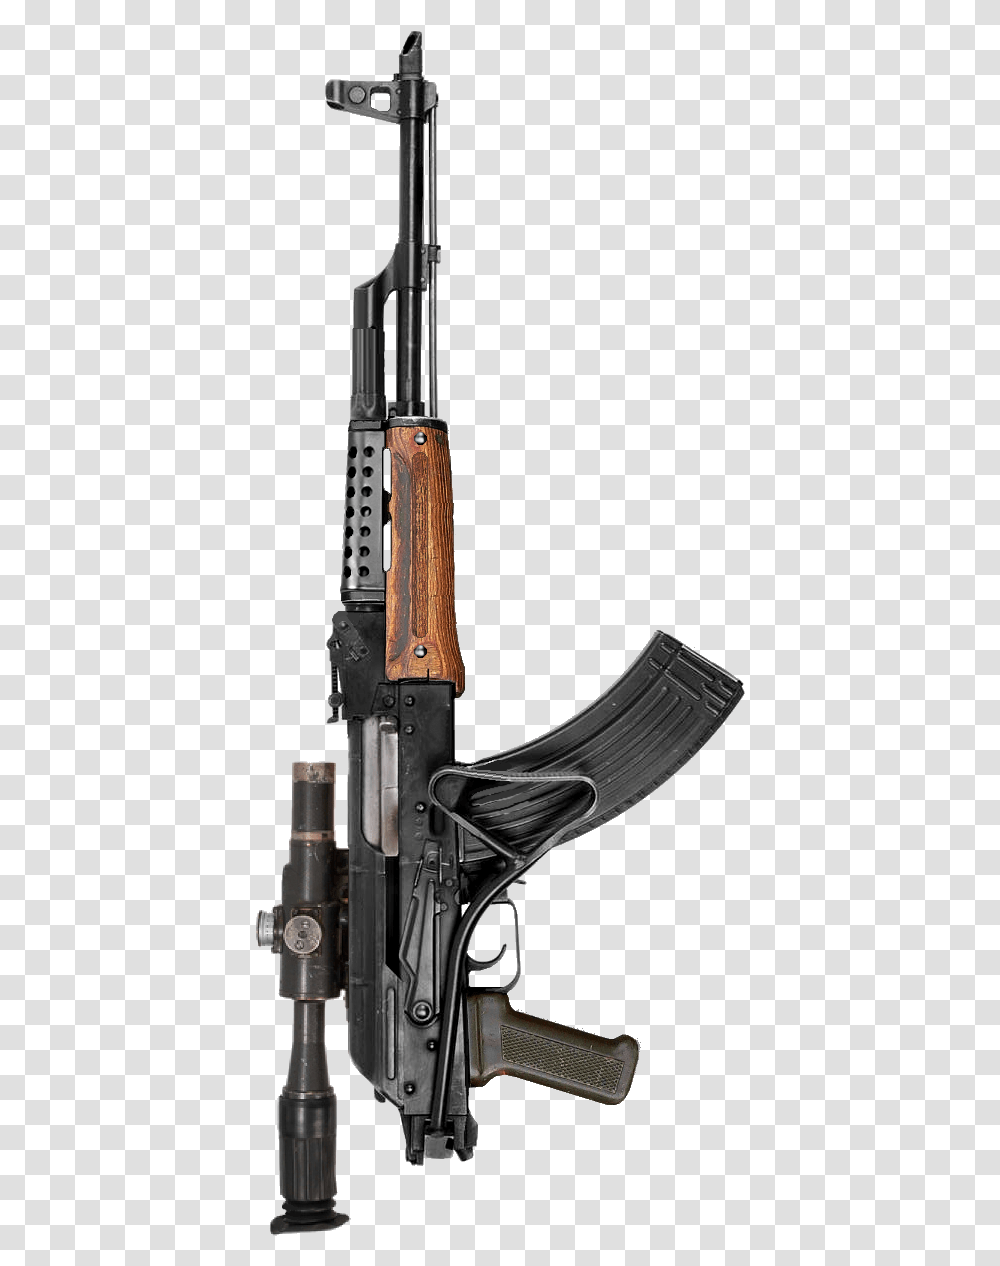 Type 56 Ak 47 Accessories, Weapon, Weaponry, Gun, Rifle Transparent Png